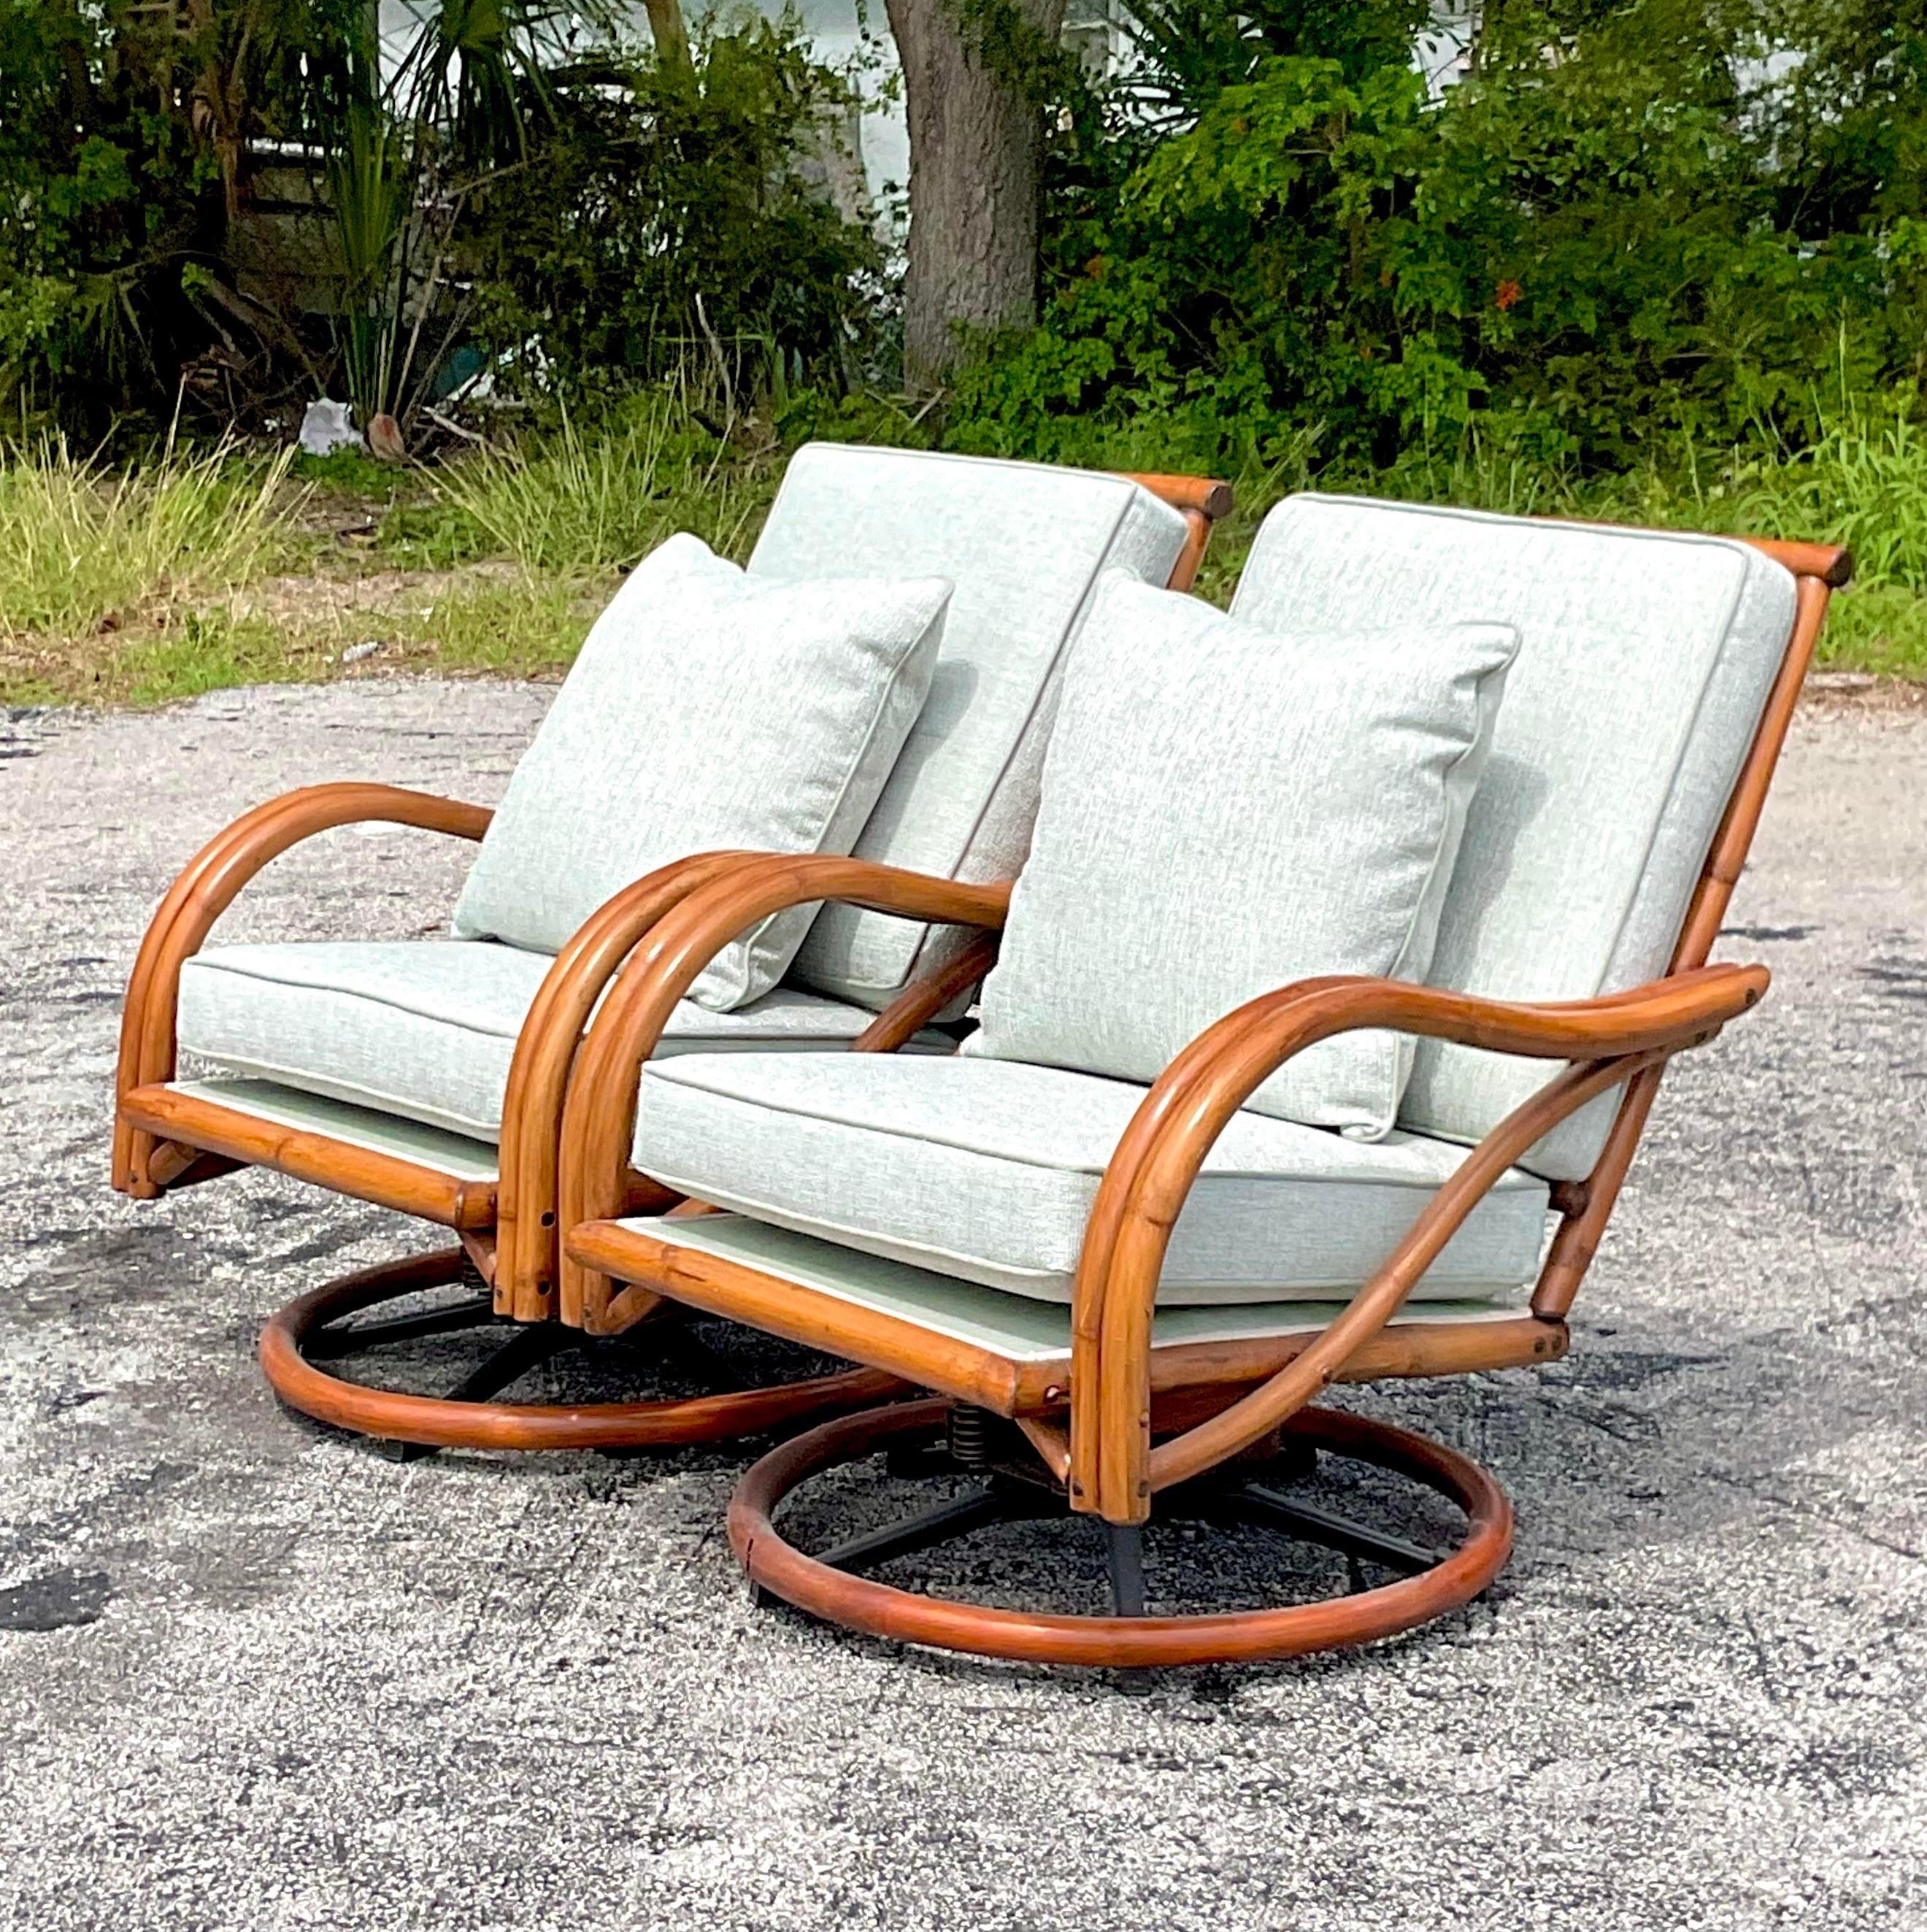 Mid-20th Century Vintage Coastal Bent Rattan Swivel Chairs - a Pair For Sale 3